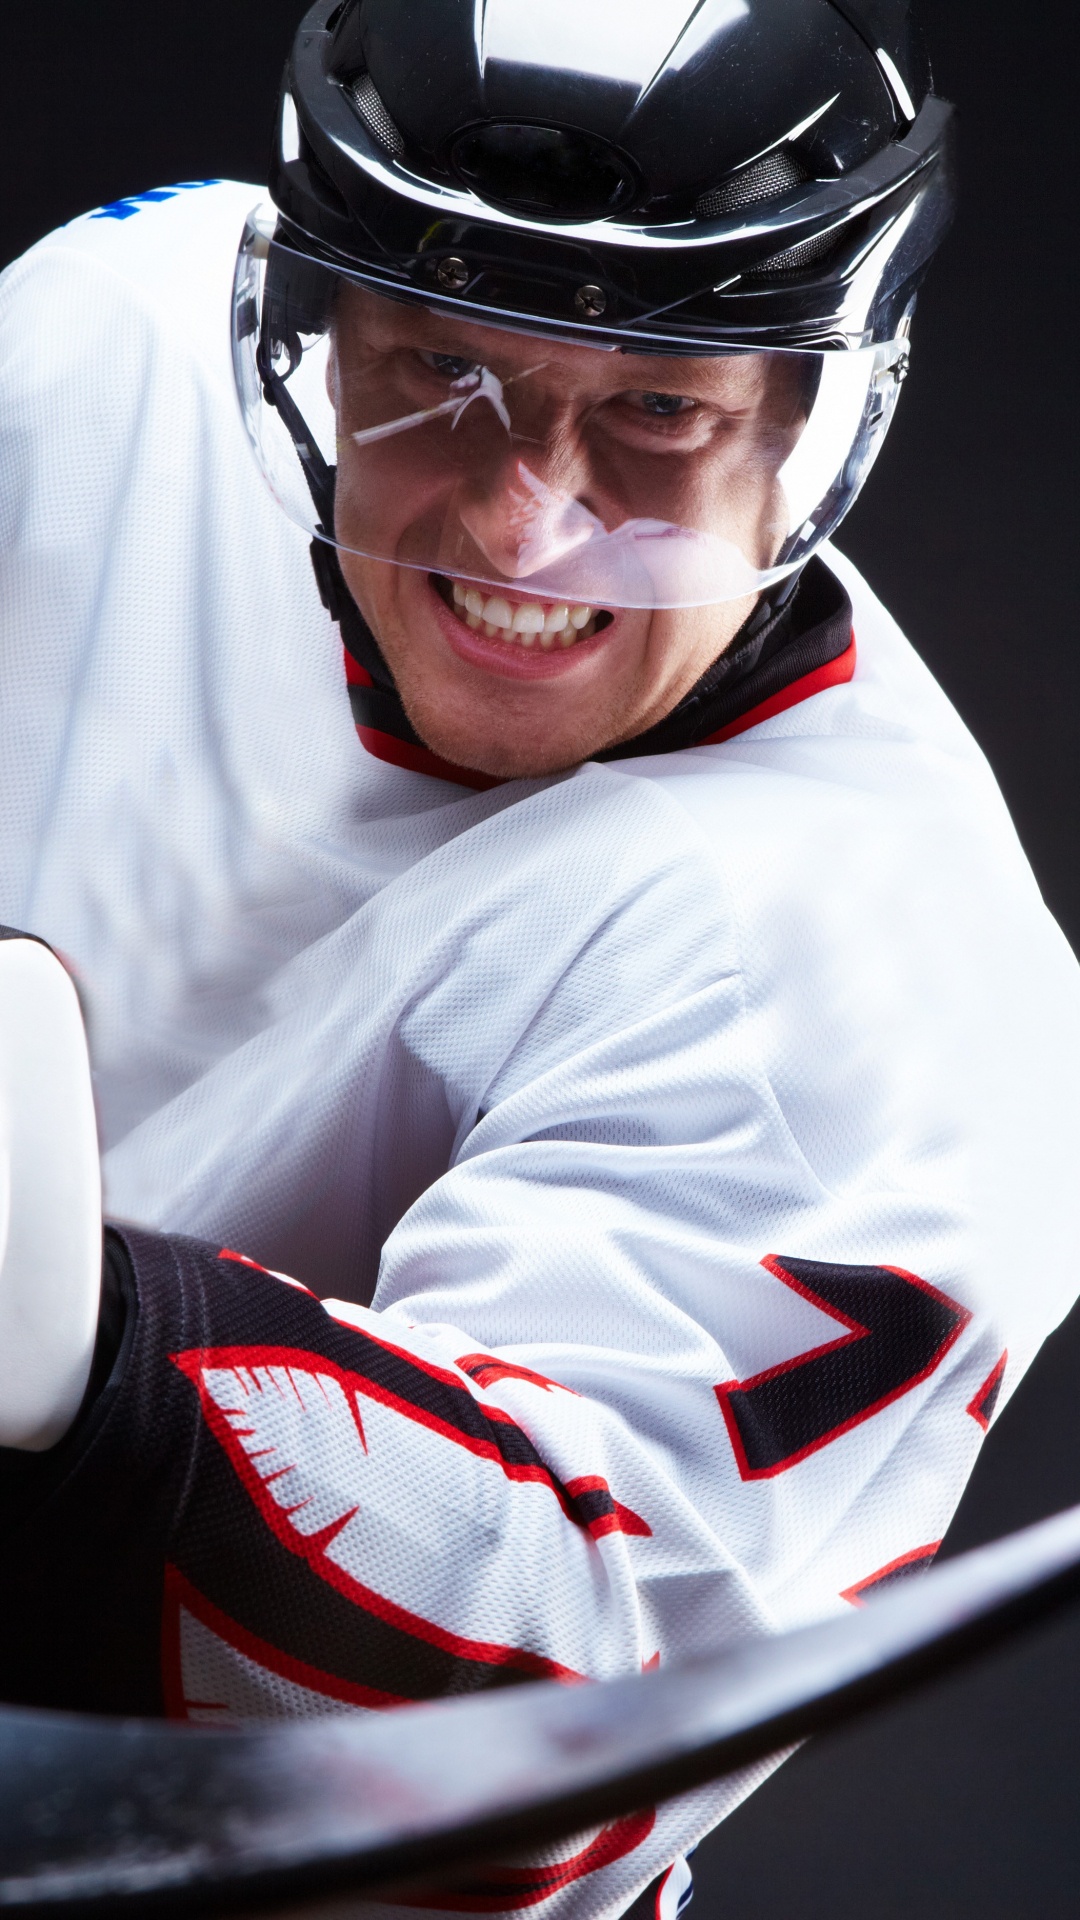 Man in White and Red Long Sleeve Shirt Wearing Black Helmet. Wallpaper in 1080x1920 Resolution